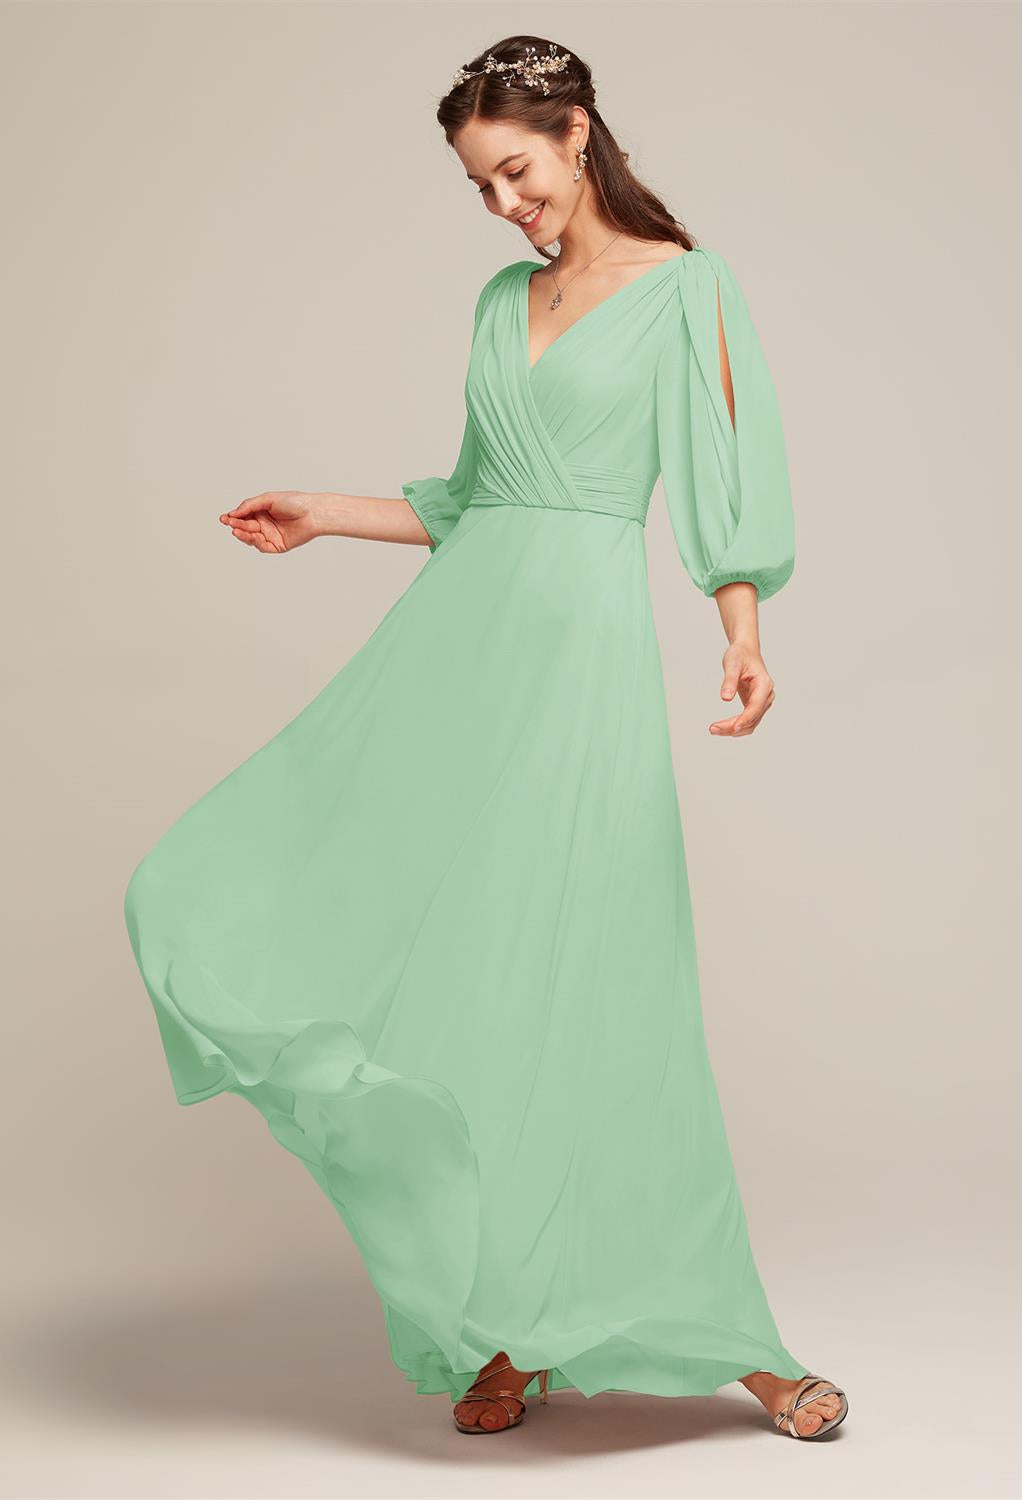 Polly - Chiffon Bridesmaid Dress - Off the Rack from Bergamot Bridal, with a v-neck and sleeve ruffles.